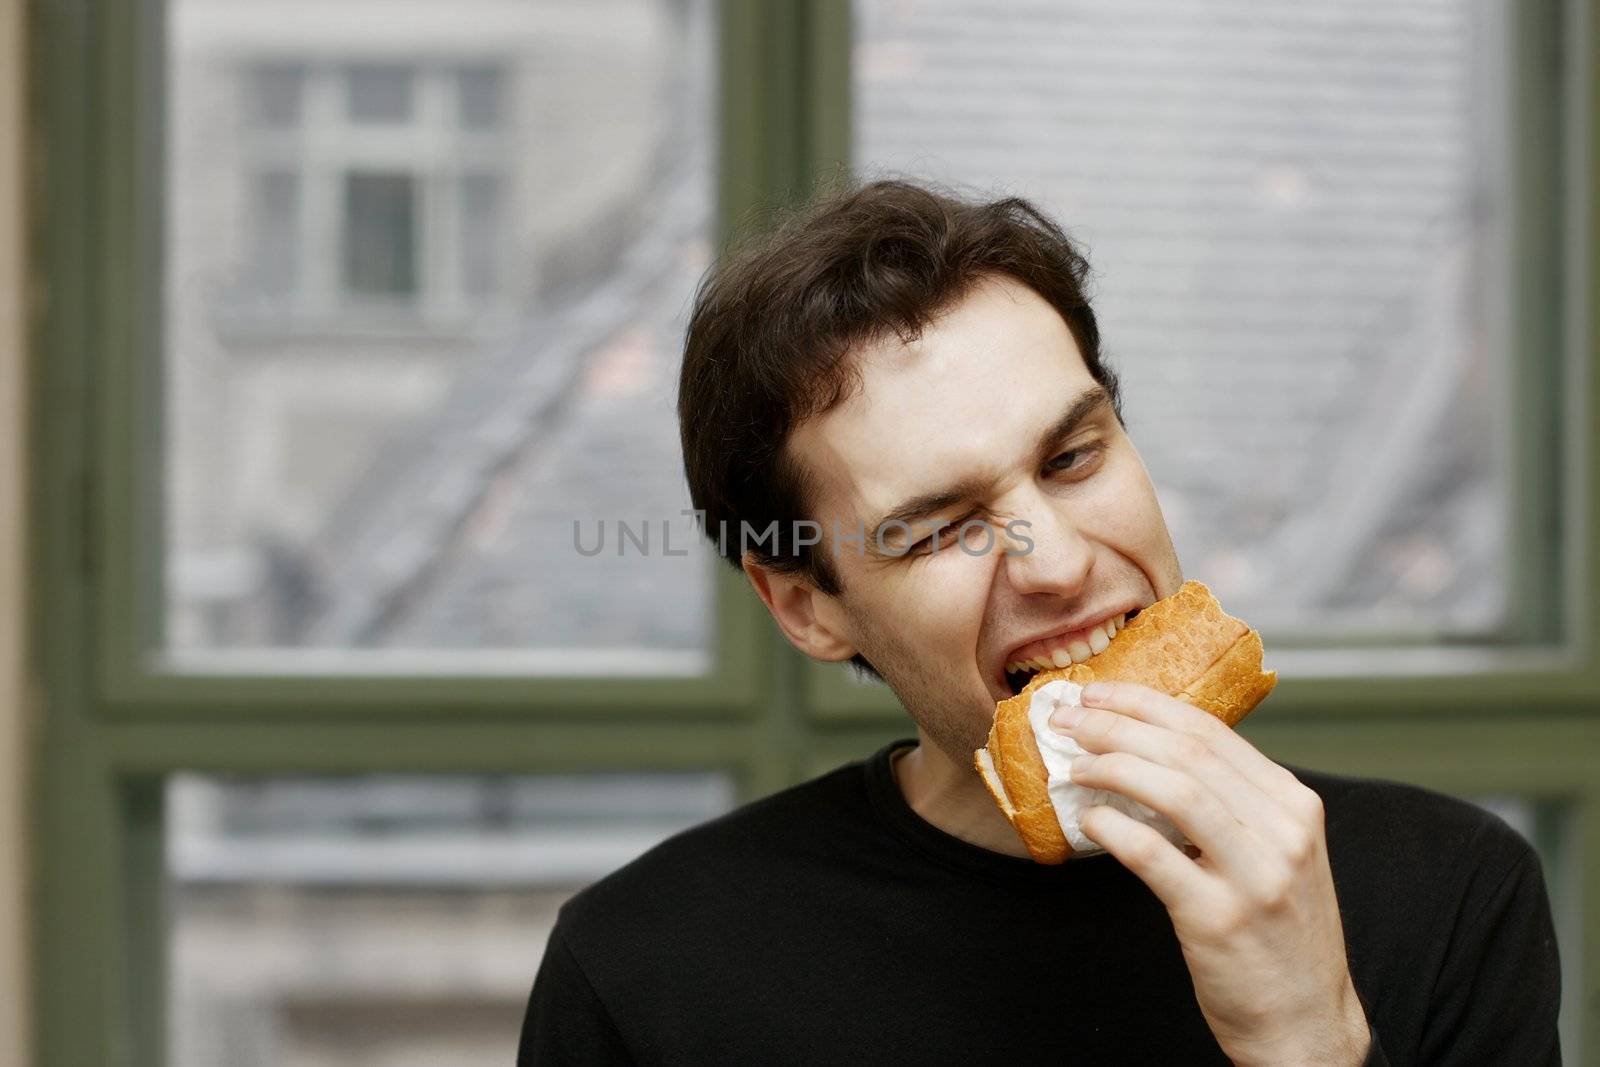 Man eating a sandwich with strange expression